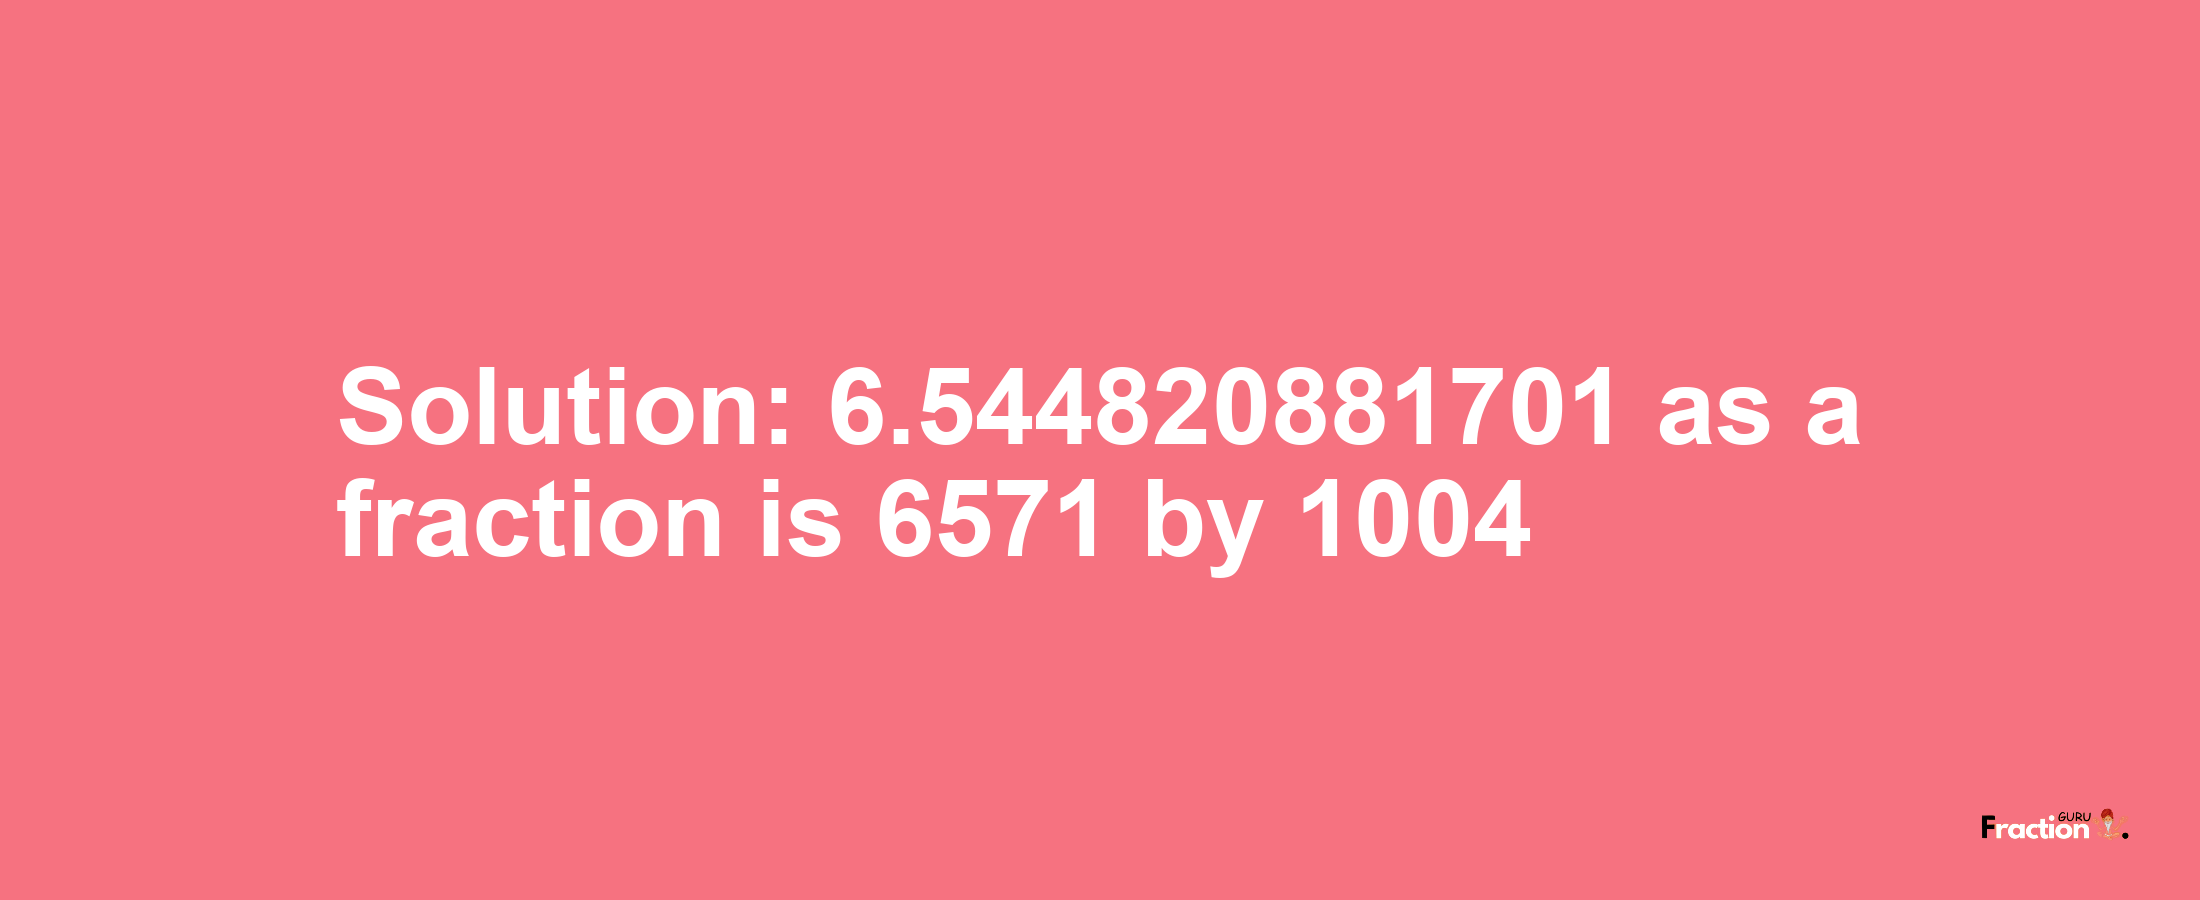 Solution:6.544820881701 as a fraction is 6571/1004